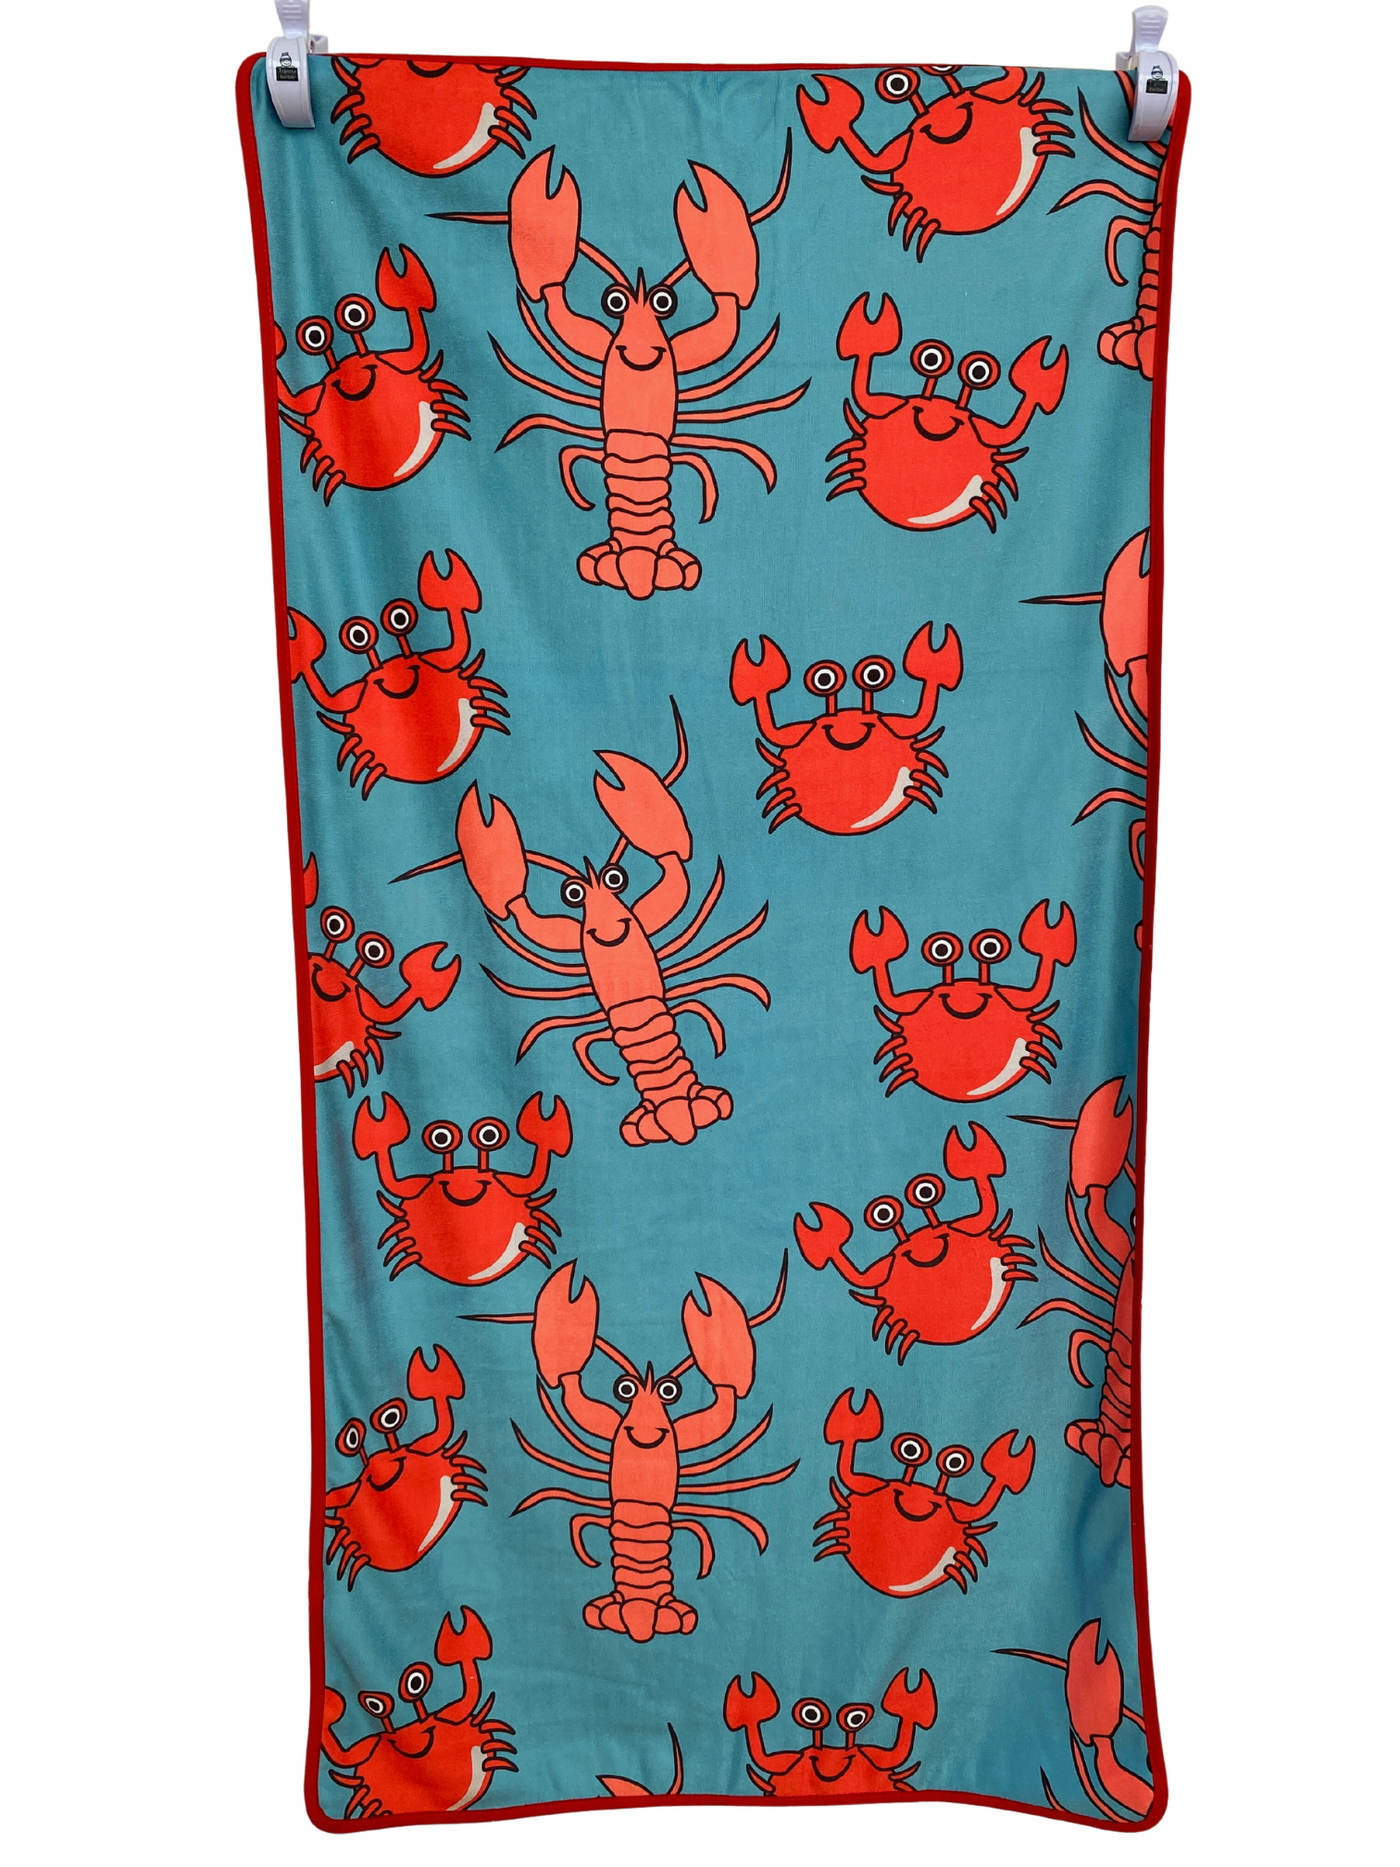 Kid Towel (0-3 years): Lobsters and crabs